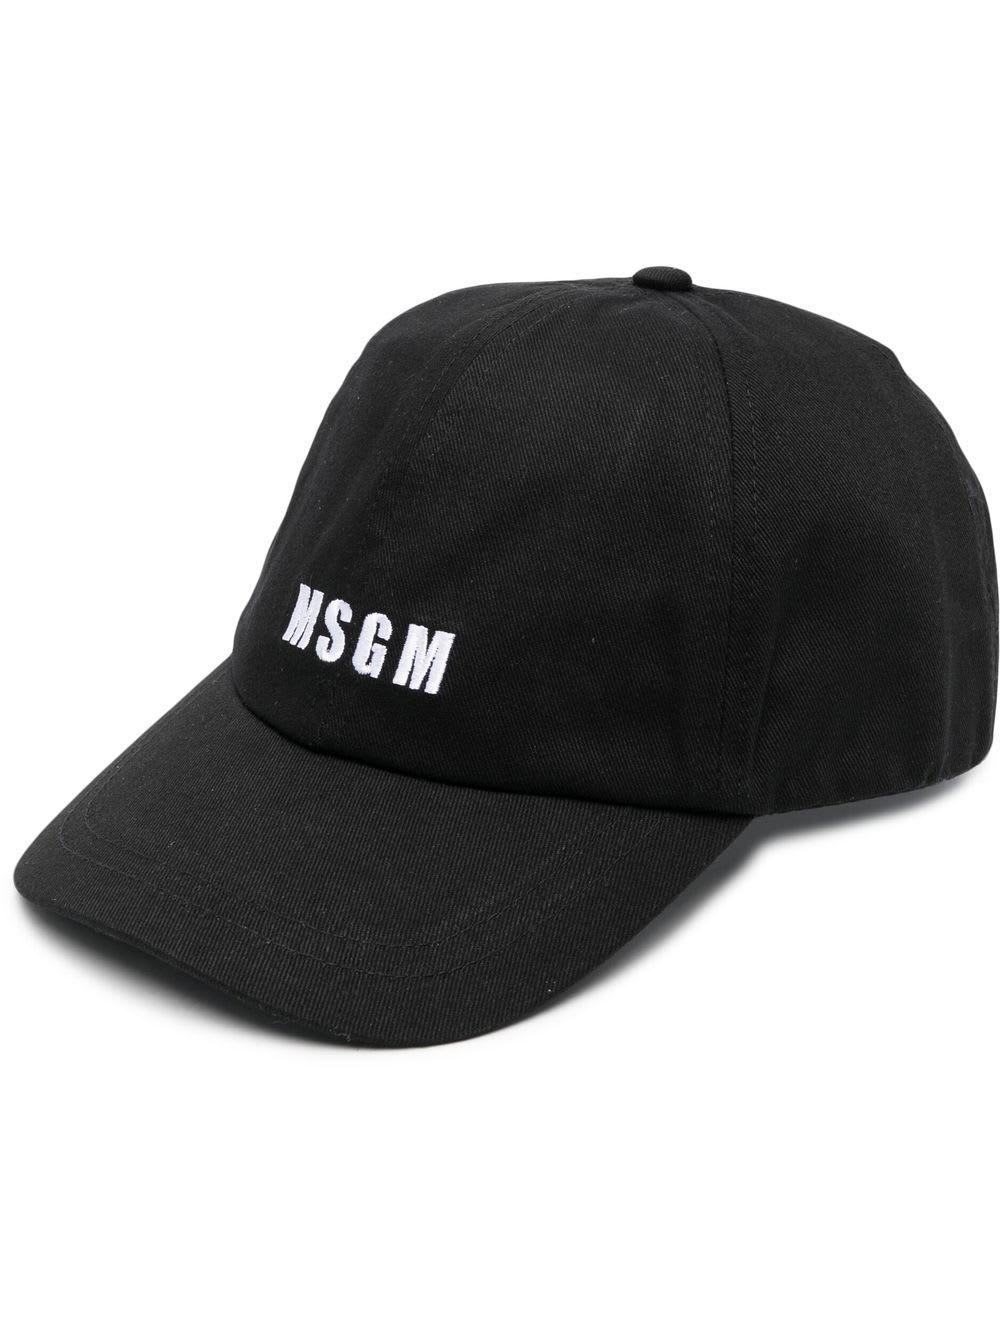 MSGM Kids Black Baseball Hat With Embroidered Logo